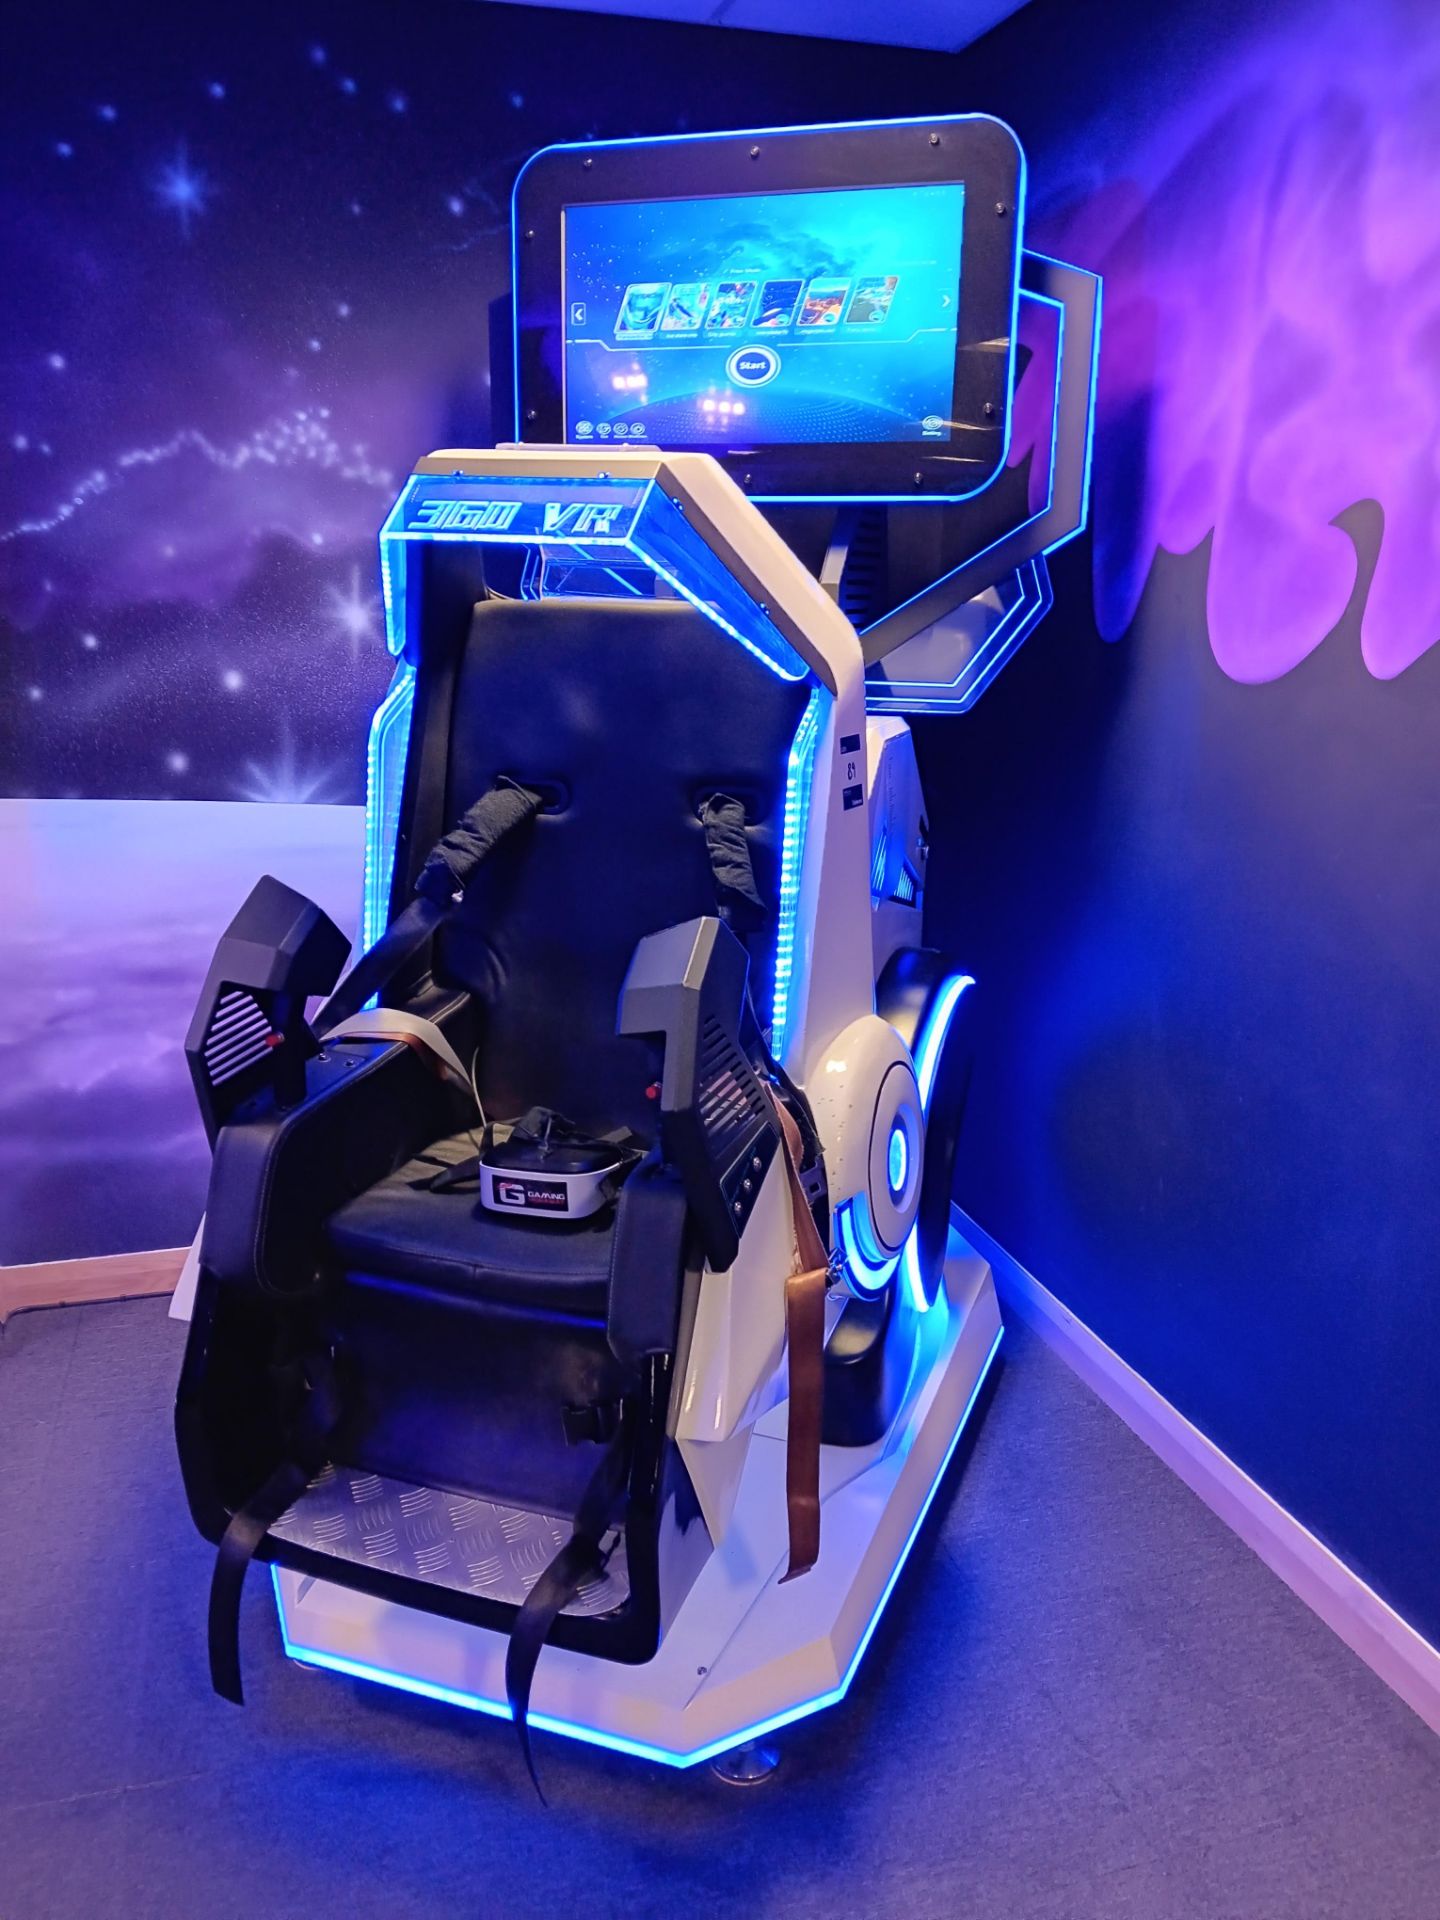 Owatch 360 Degree Rotating VR Chair Roller Coaster Simulator – Cost New £14,400 – Buyer to - Image 2 of 3